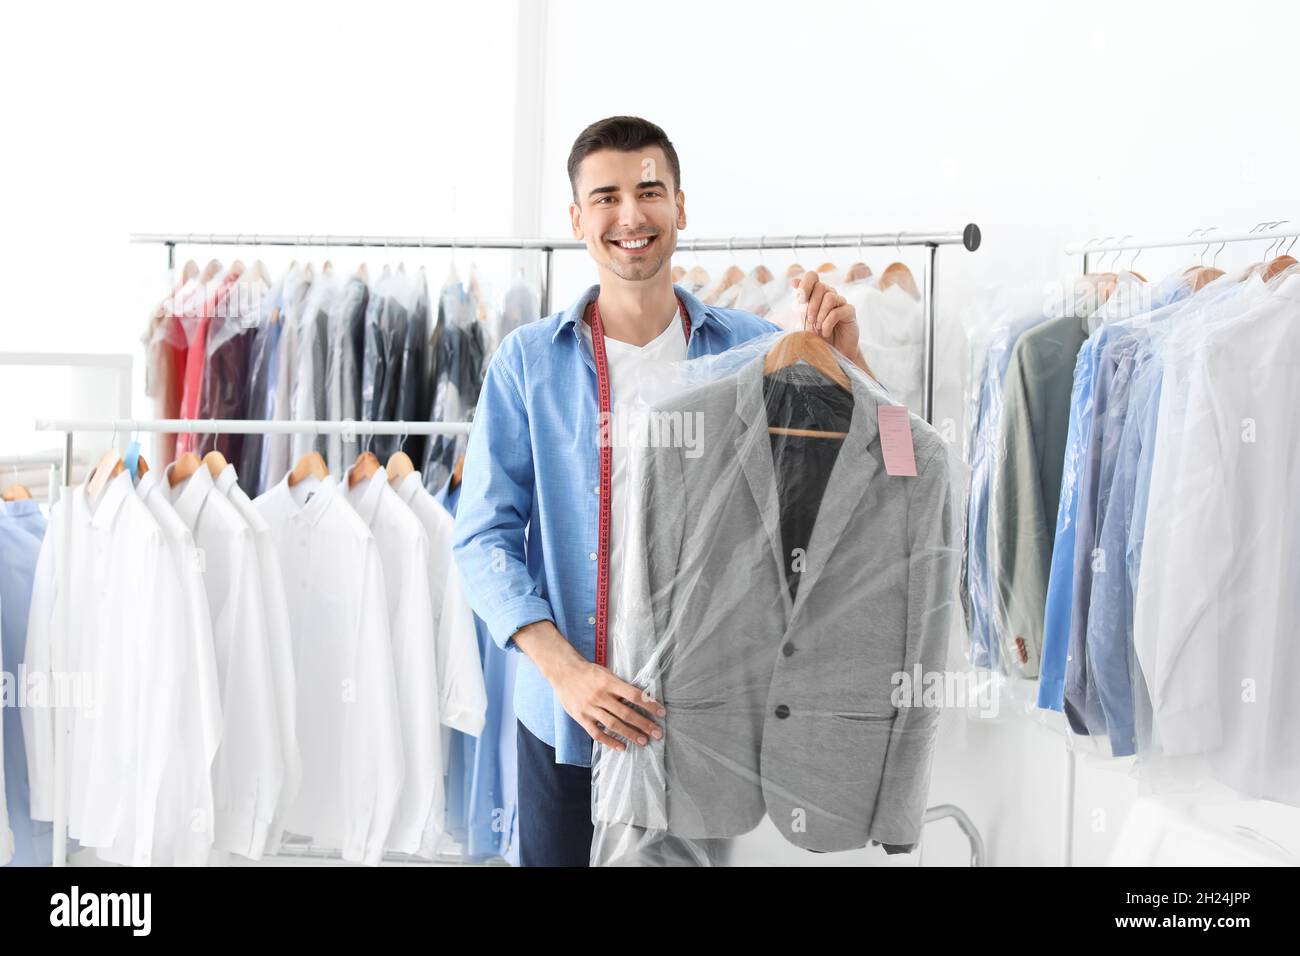 https://c8.alamy.com/comp/2H24JPP/young-man-holding-hanger-with-jacket-in-plastic-bag-at-dry-cleaners-2H24JPP.jpg